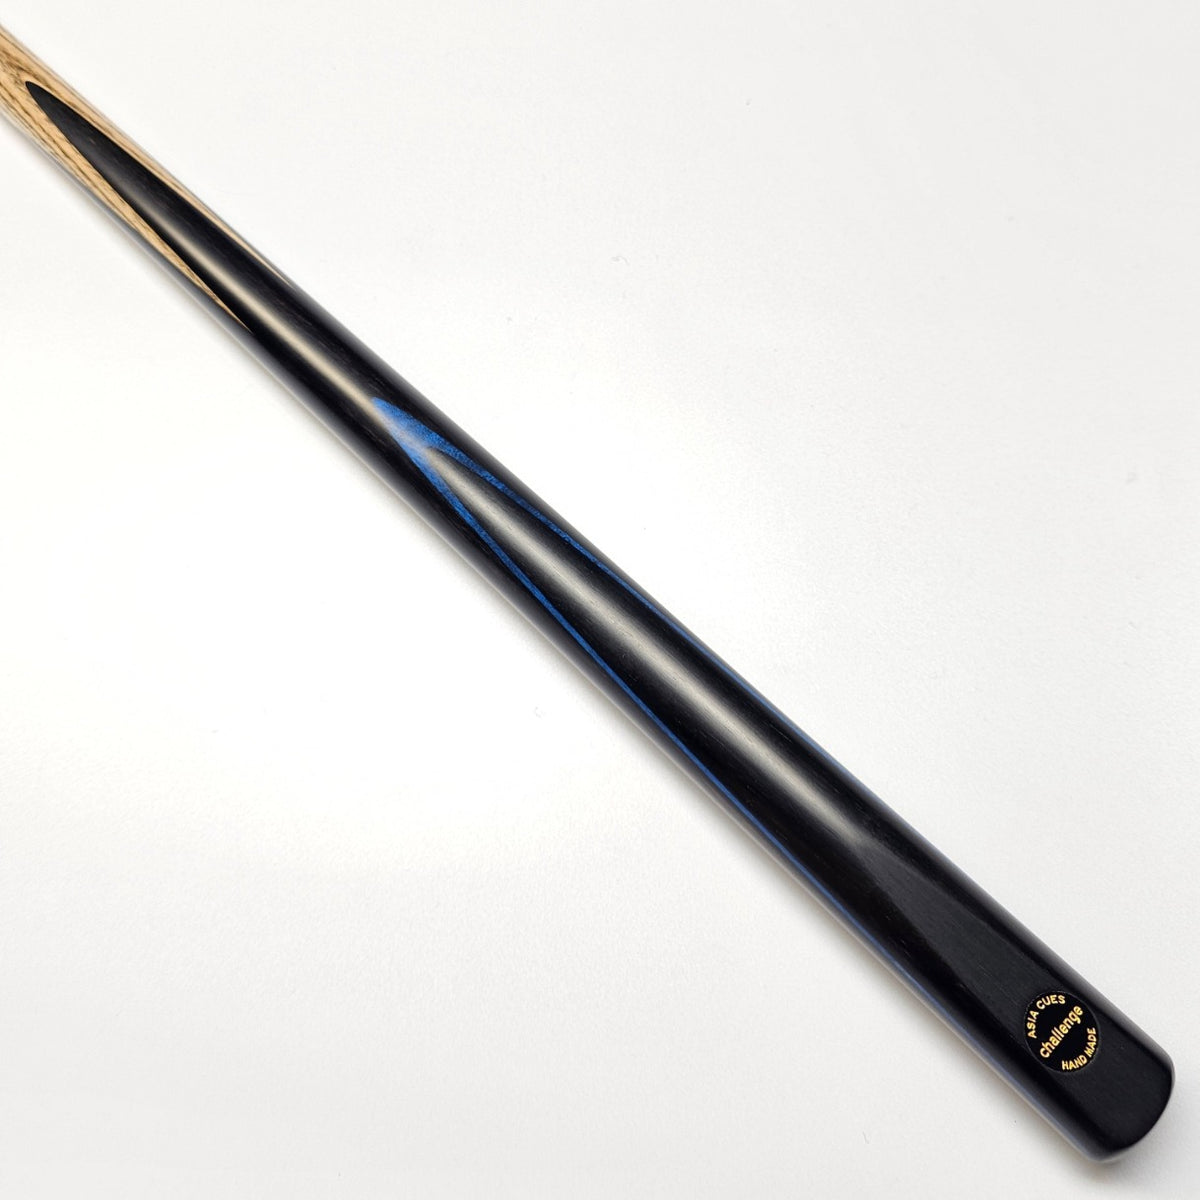 Asia Cues Challenge Range One Piece Cue Ash Shaft Ebony Butt with Blue Veneer. Shaft View